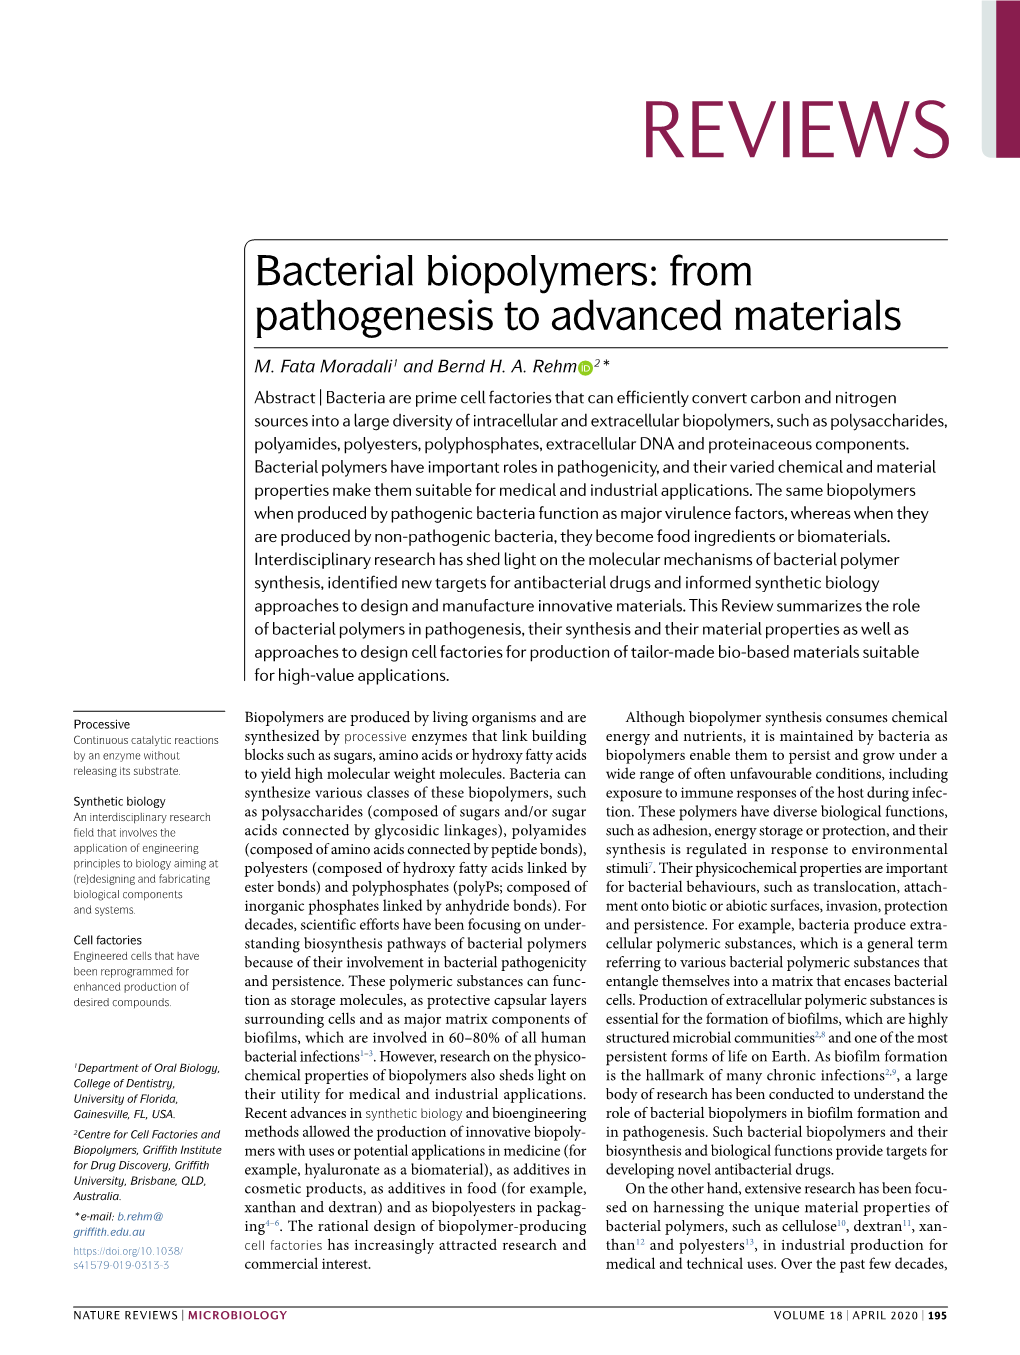 Bacterial Biopolymers: from Pathogenesis to Advanced Materials